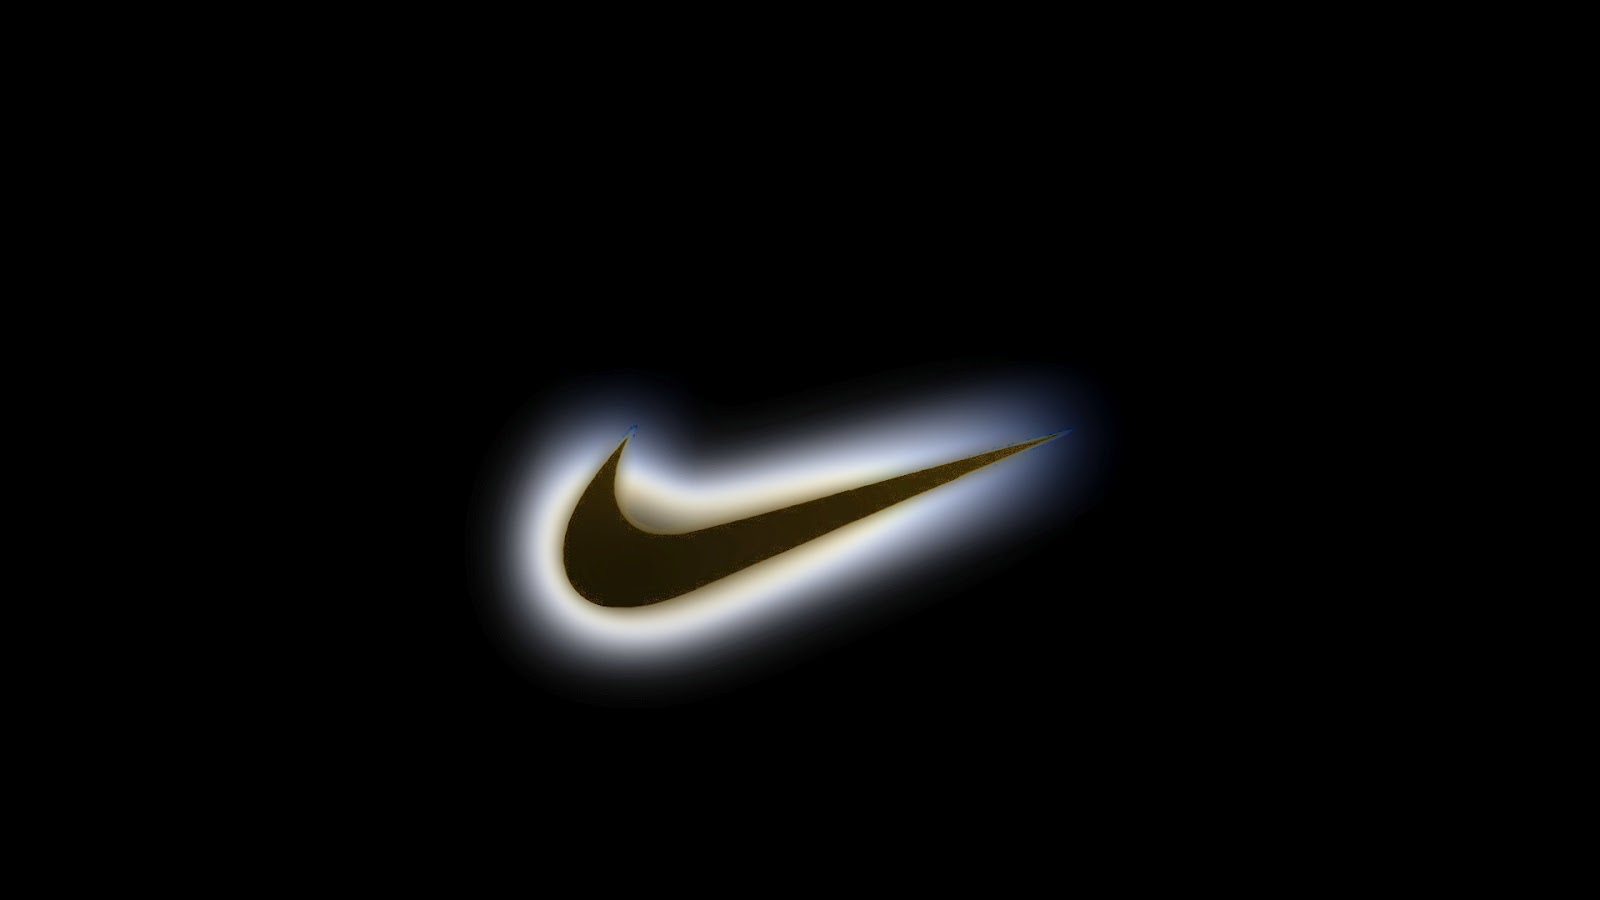 Nike Wallpaper Pictures  Download Free Images on Unsplash